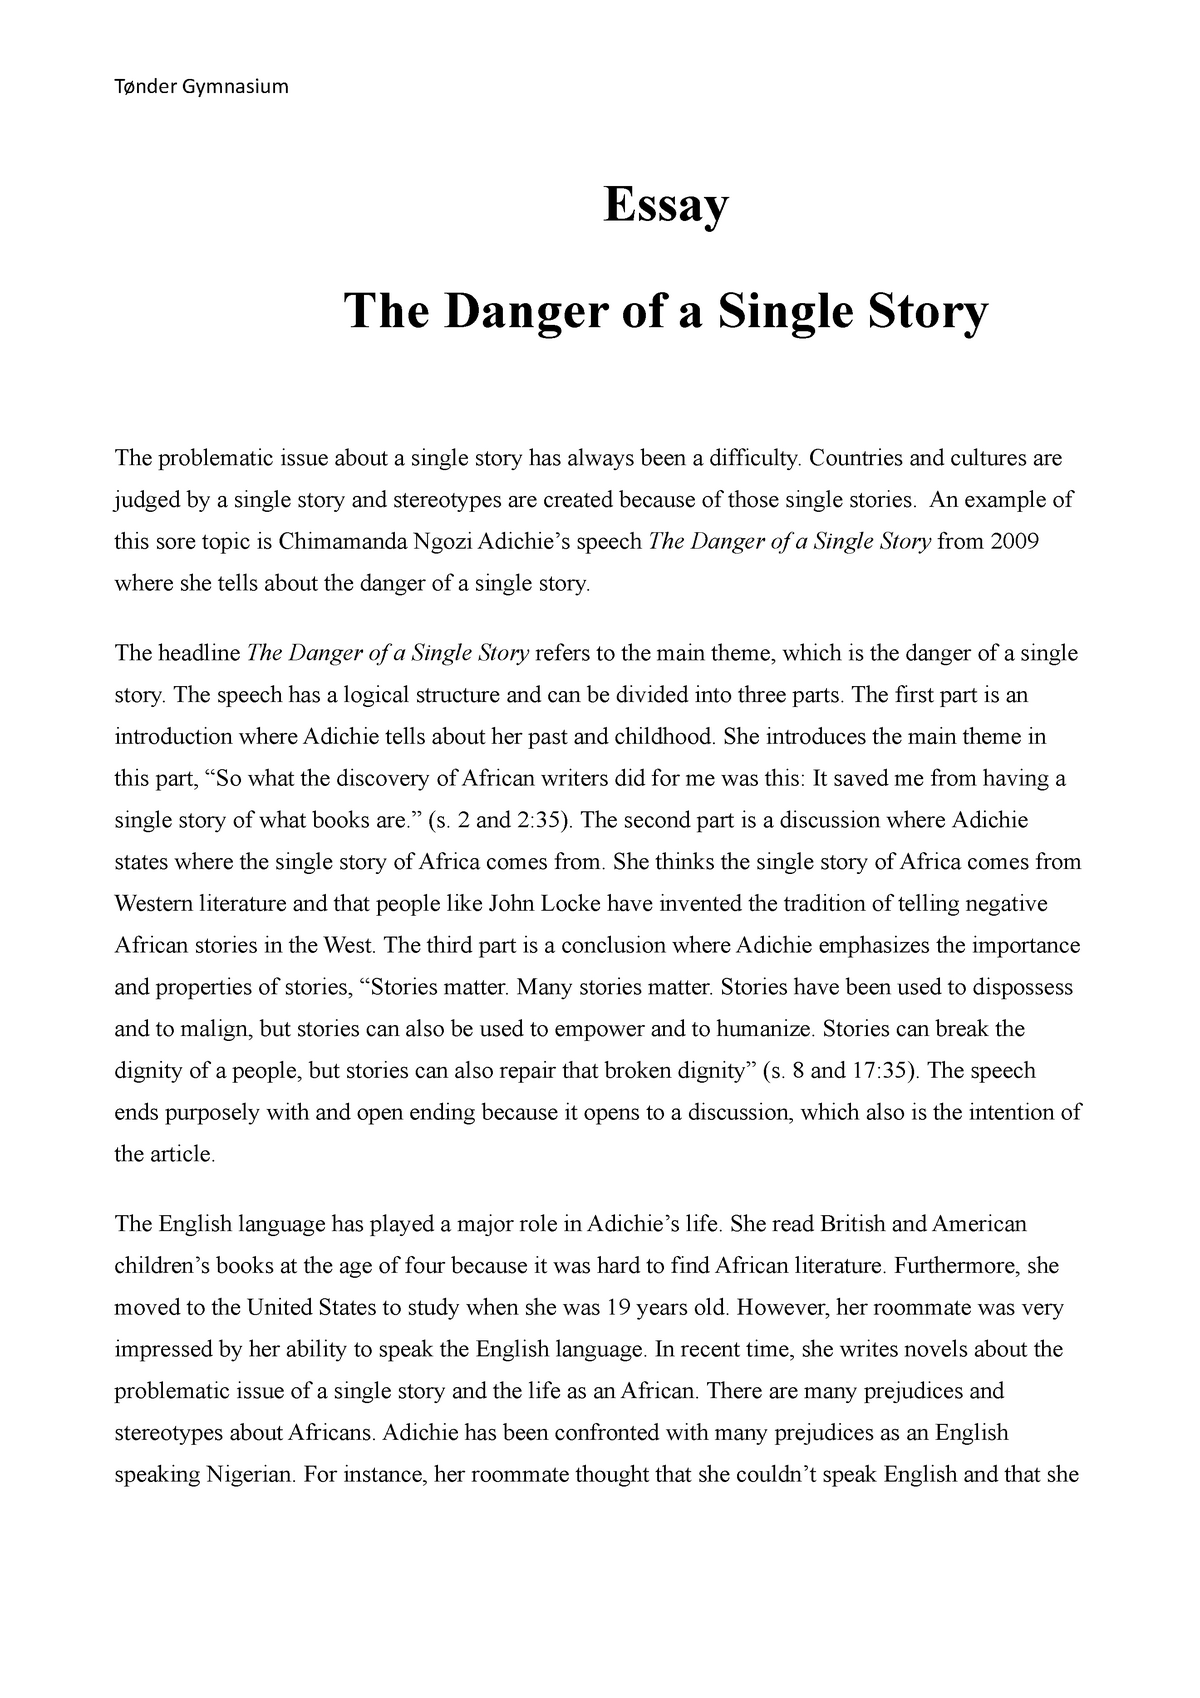 essay about a single story